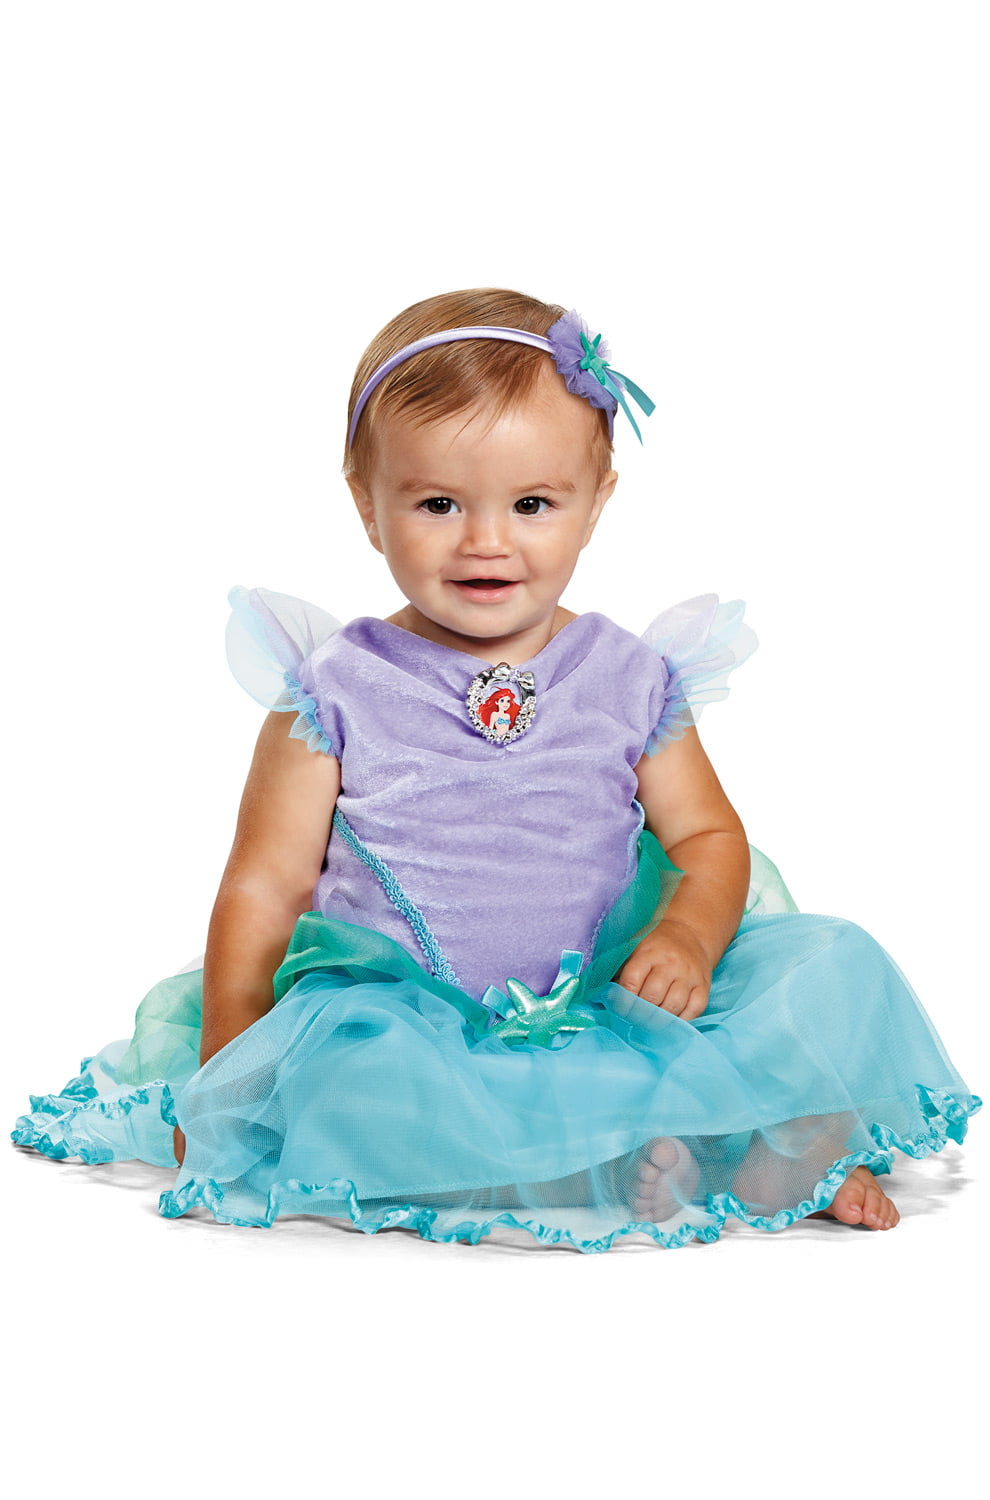 The Little Mermaid Ariel Infant Halloween Costume, Size 12-18 Months ...